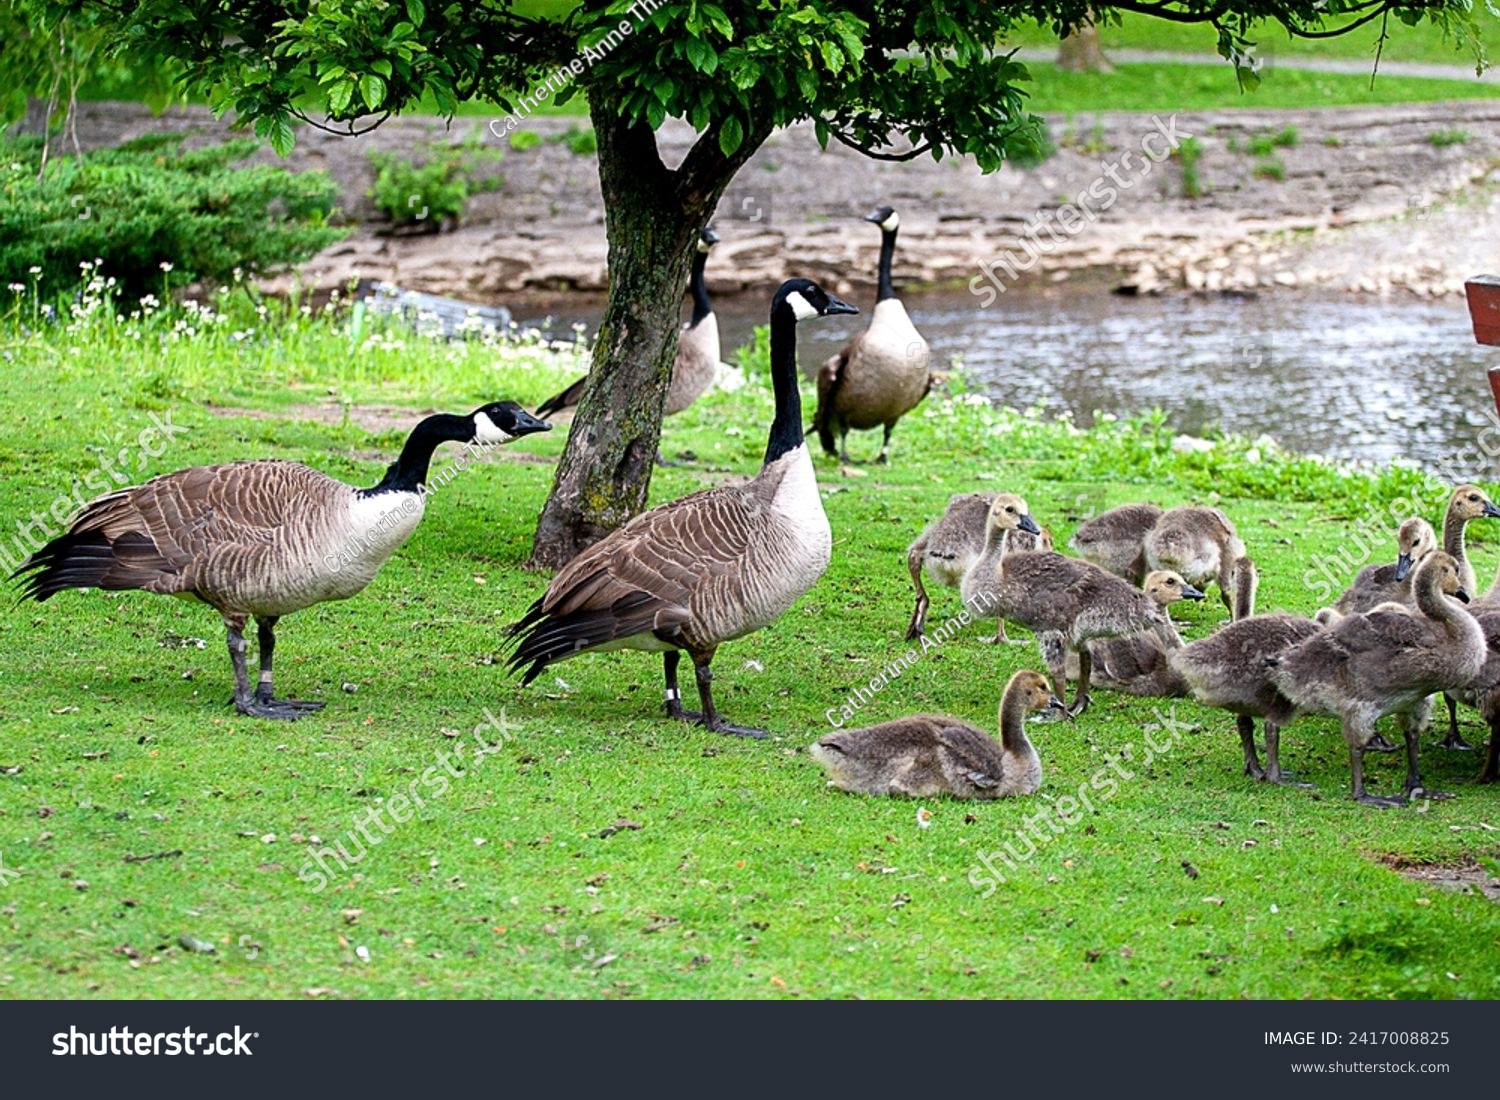 Flock gaggle Canadian geese. Canada goose. Gosling goslings babies young. Springtime spring. Lake pond green grass tree. Parents. Adult adults. Down downy feathers. Symbol. Wild wildlife water fowl. #2417008825